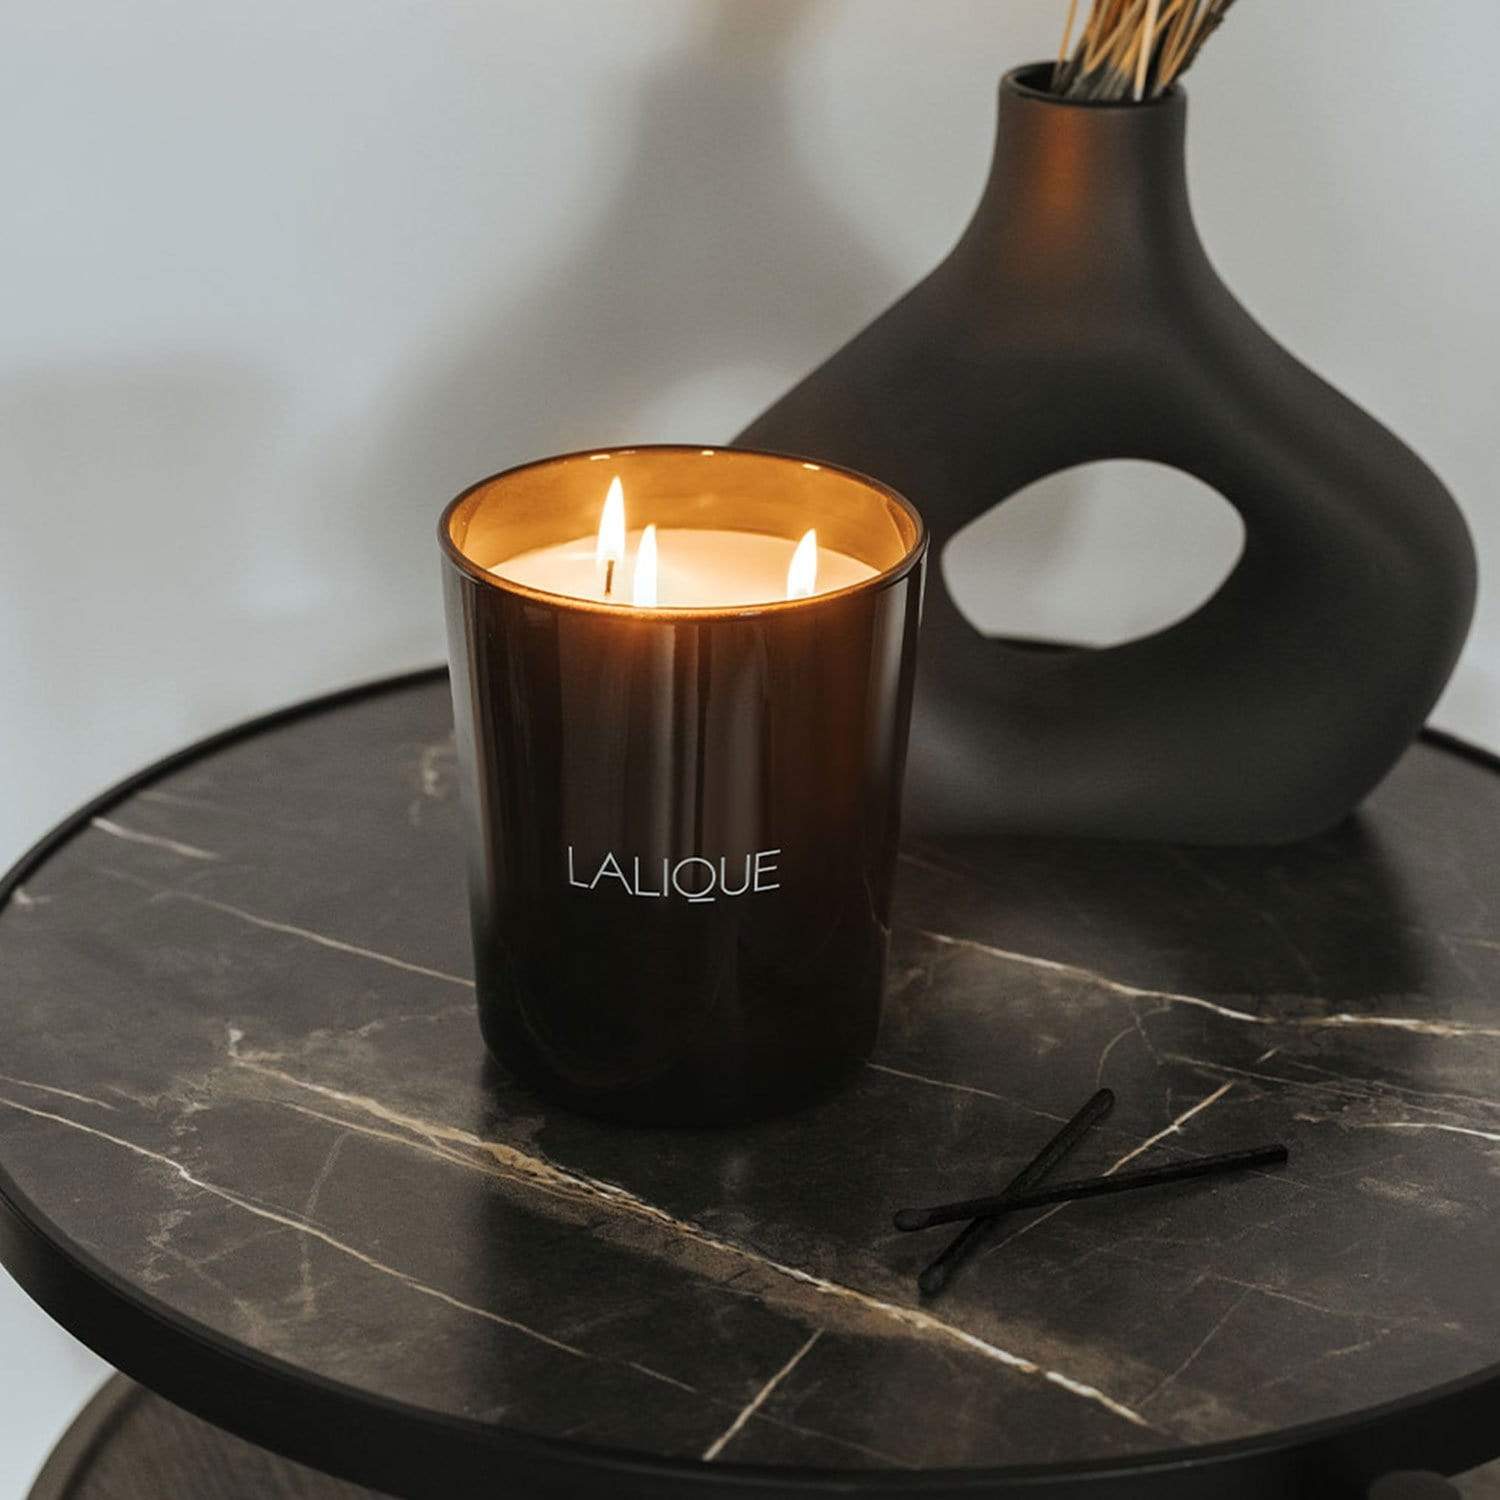 LALIQUE FIG TREE, AMALFI ITALY, SCENTED CANDLE 600G - B40481